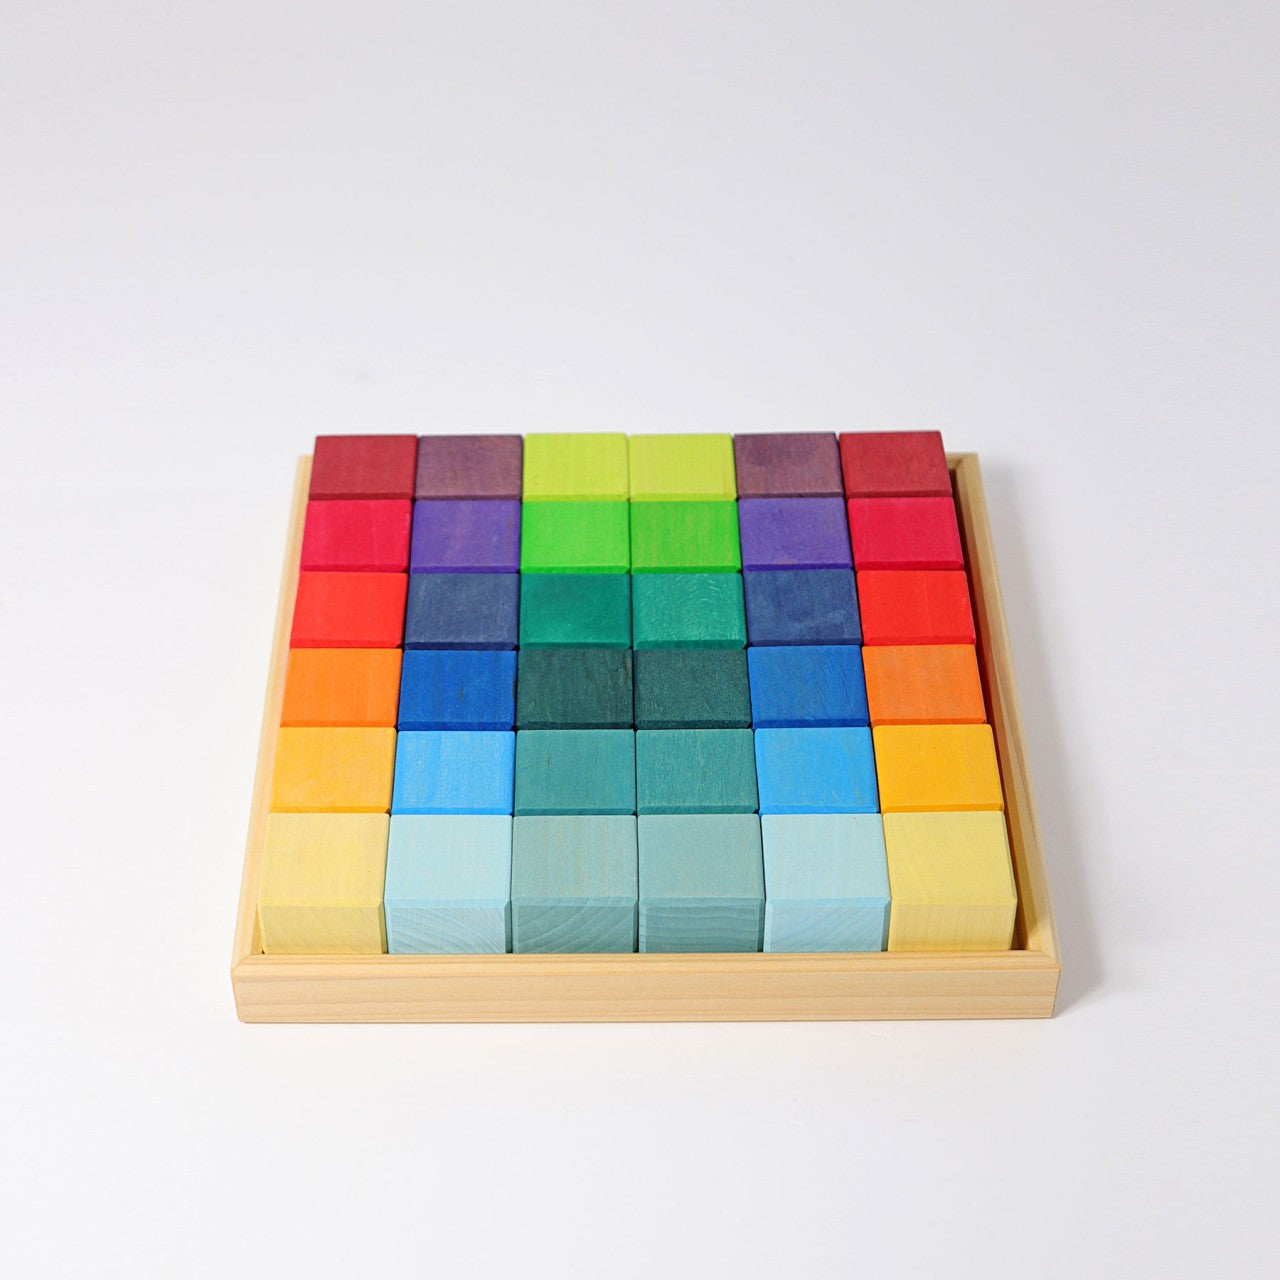 Rainbow Mosaic | Building Set | Wooden Toys for Kids | Open-Ended Play